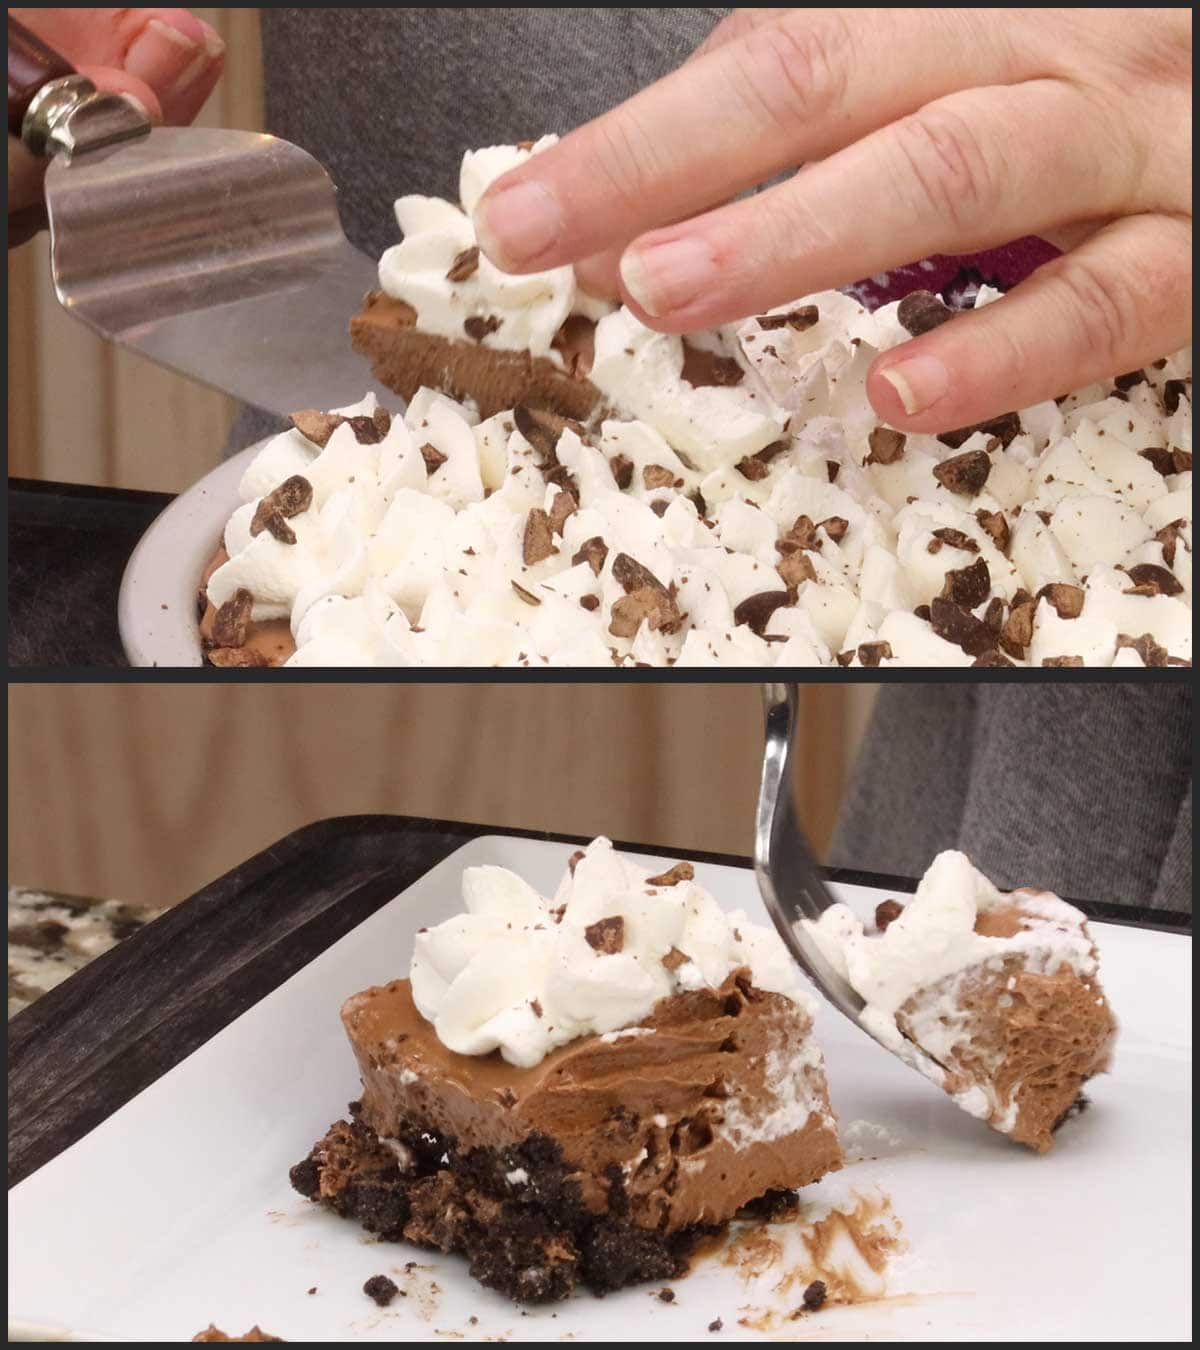 slicing and serving chocolate mousse pie